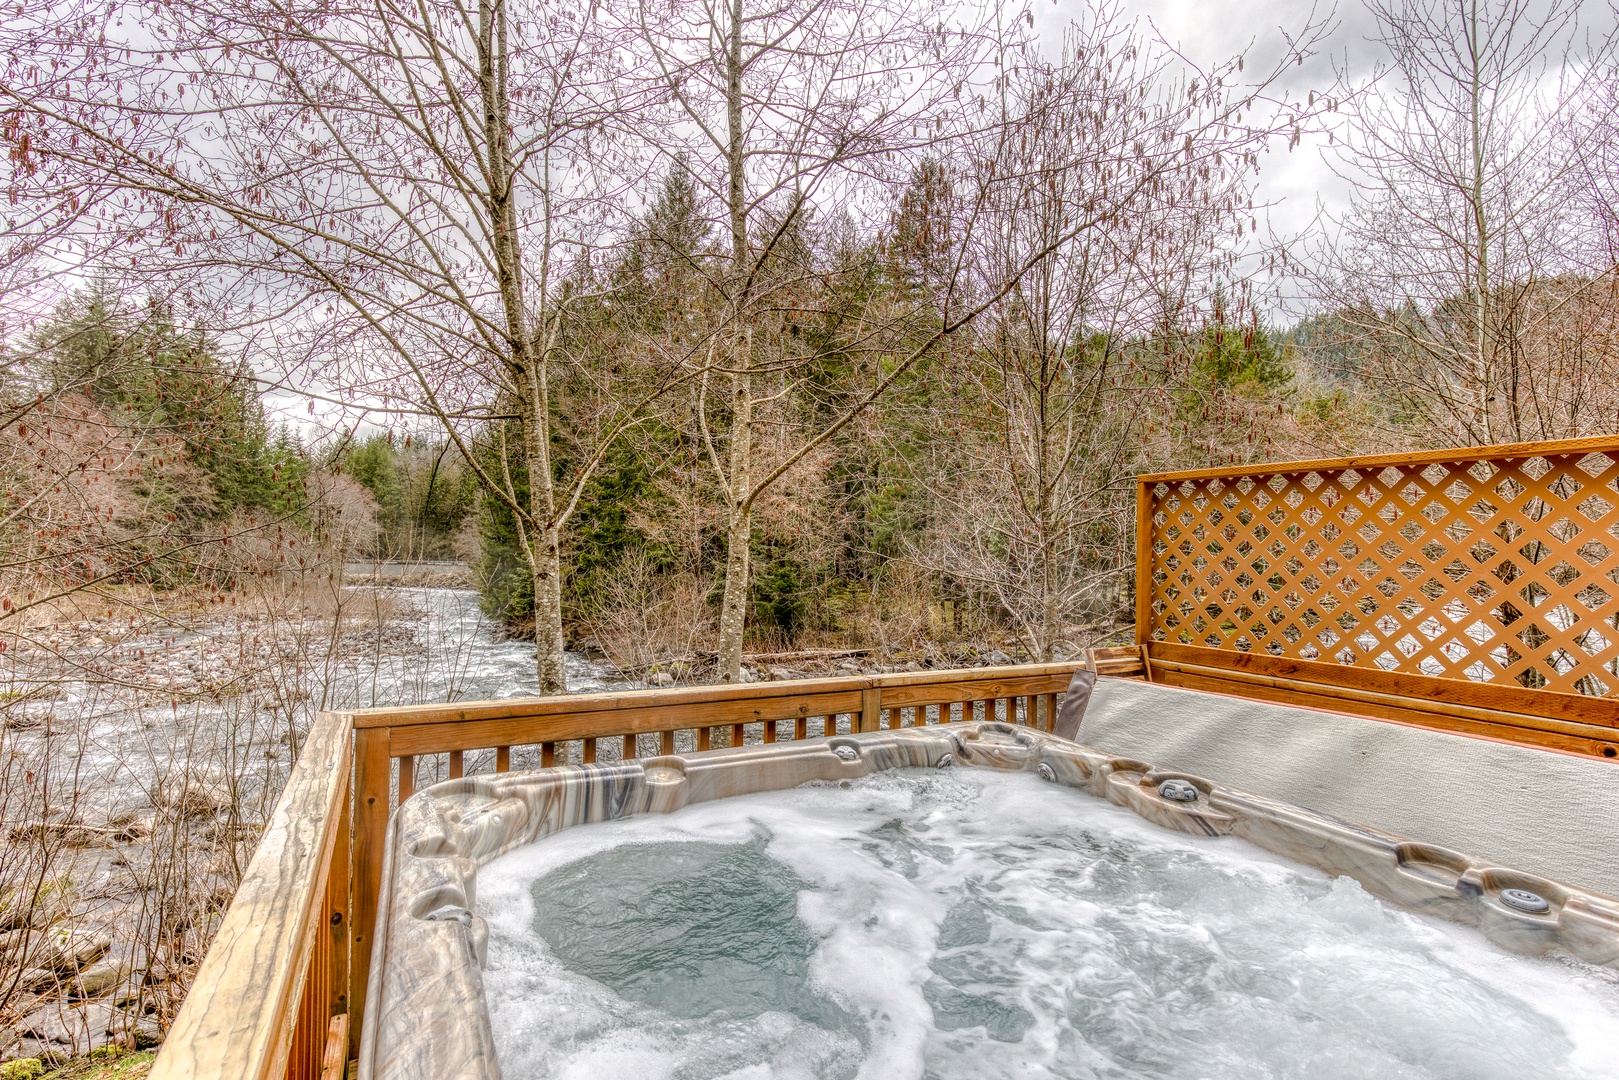 Rhododendron Vacation Rentals, Riverbend Cabin #2 - Soak in the hot tub while the river flows by